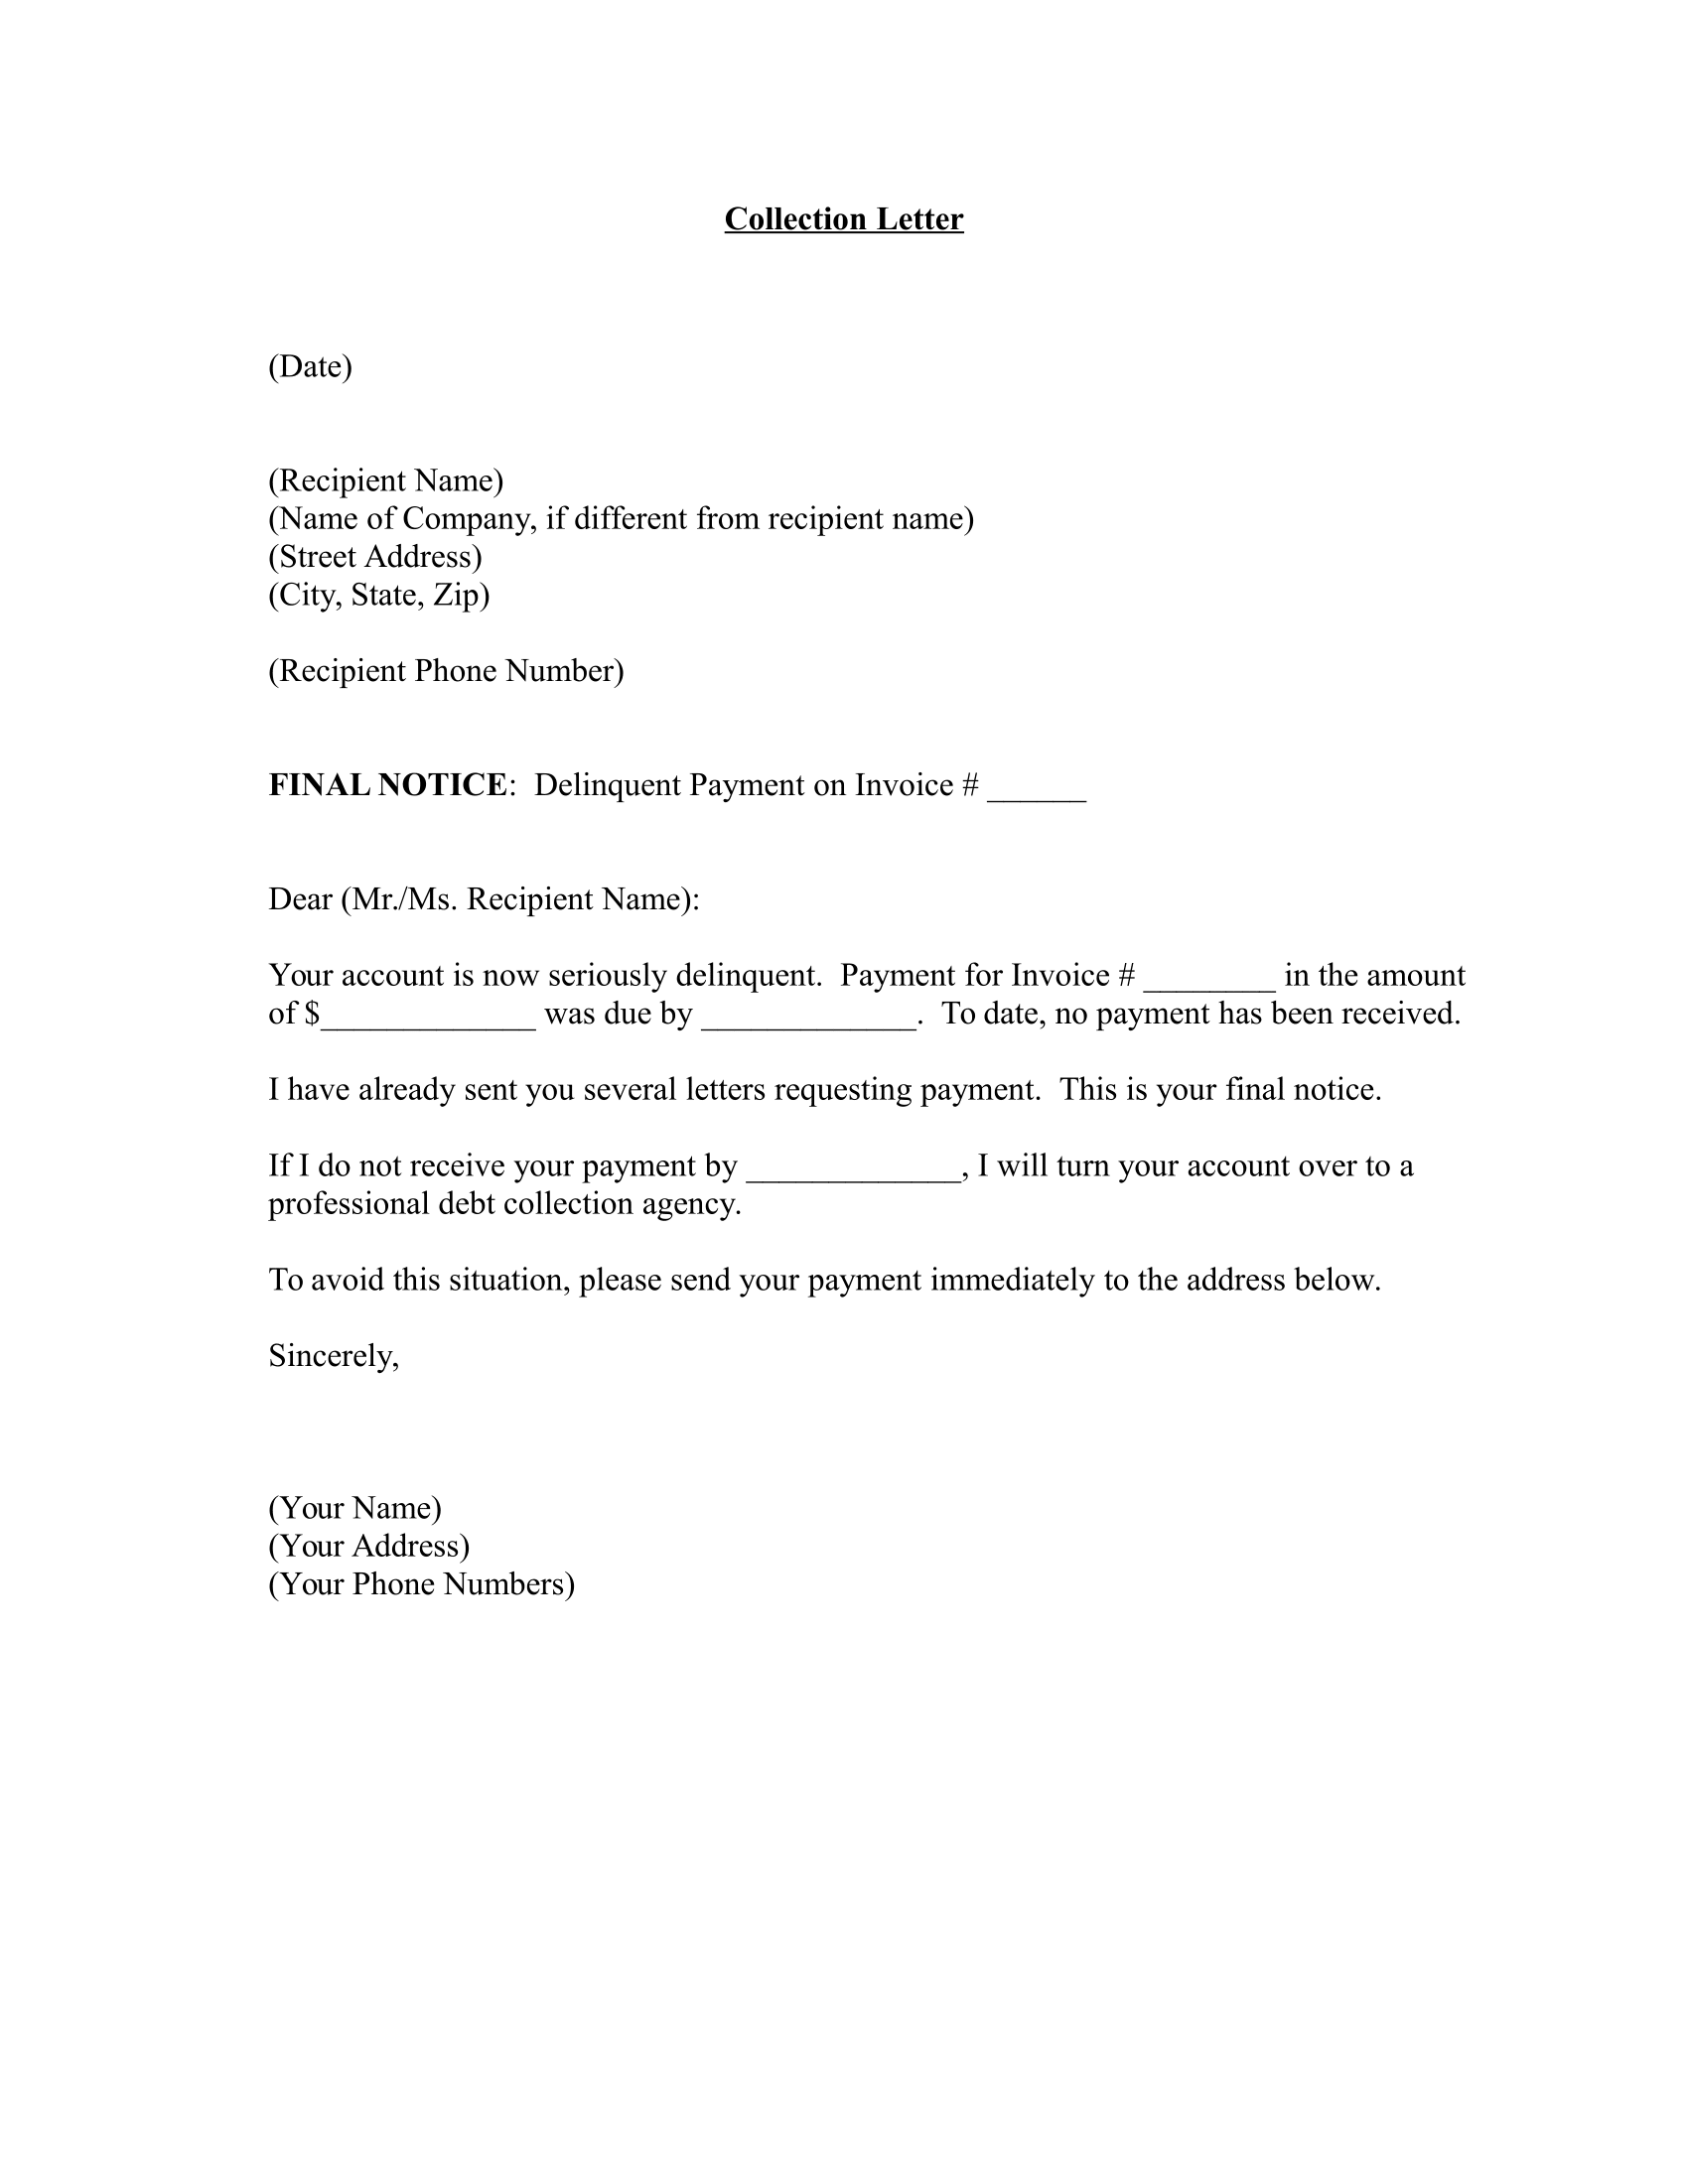 Free Past Due Letter Template from officewriting.com